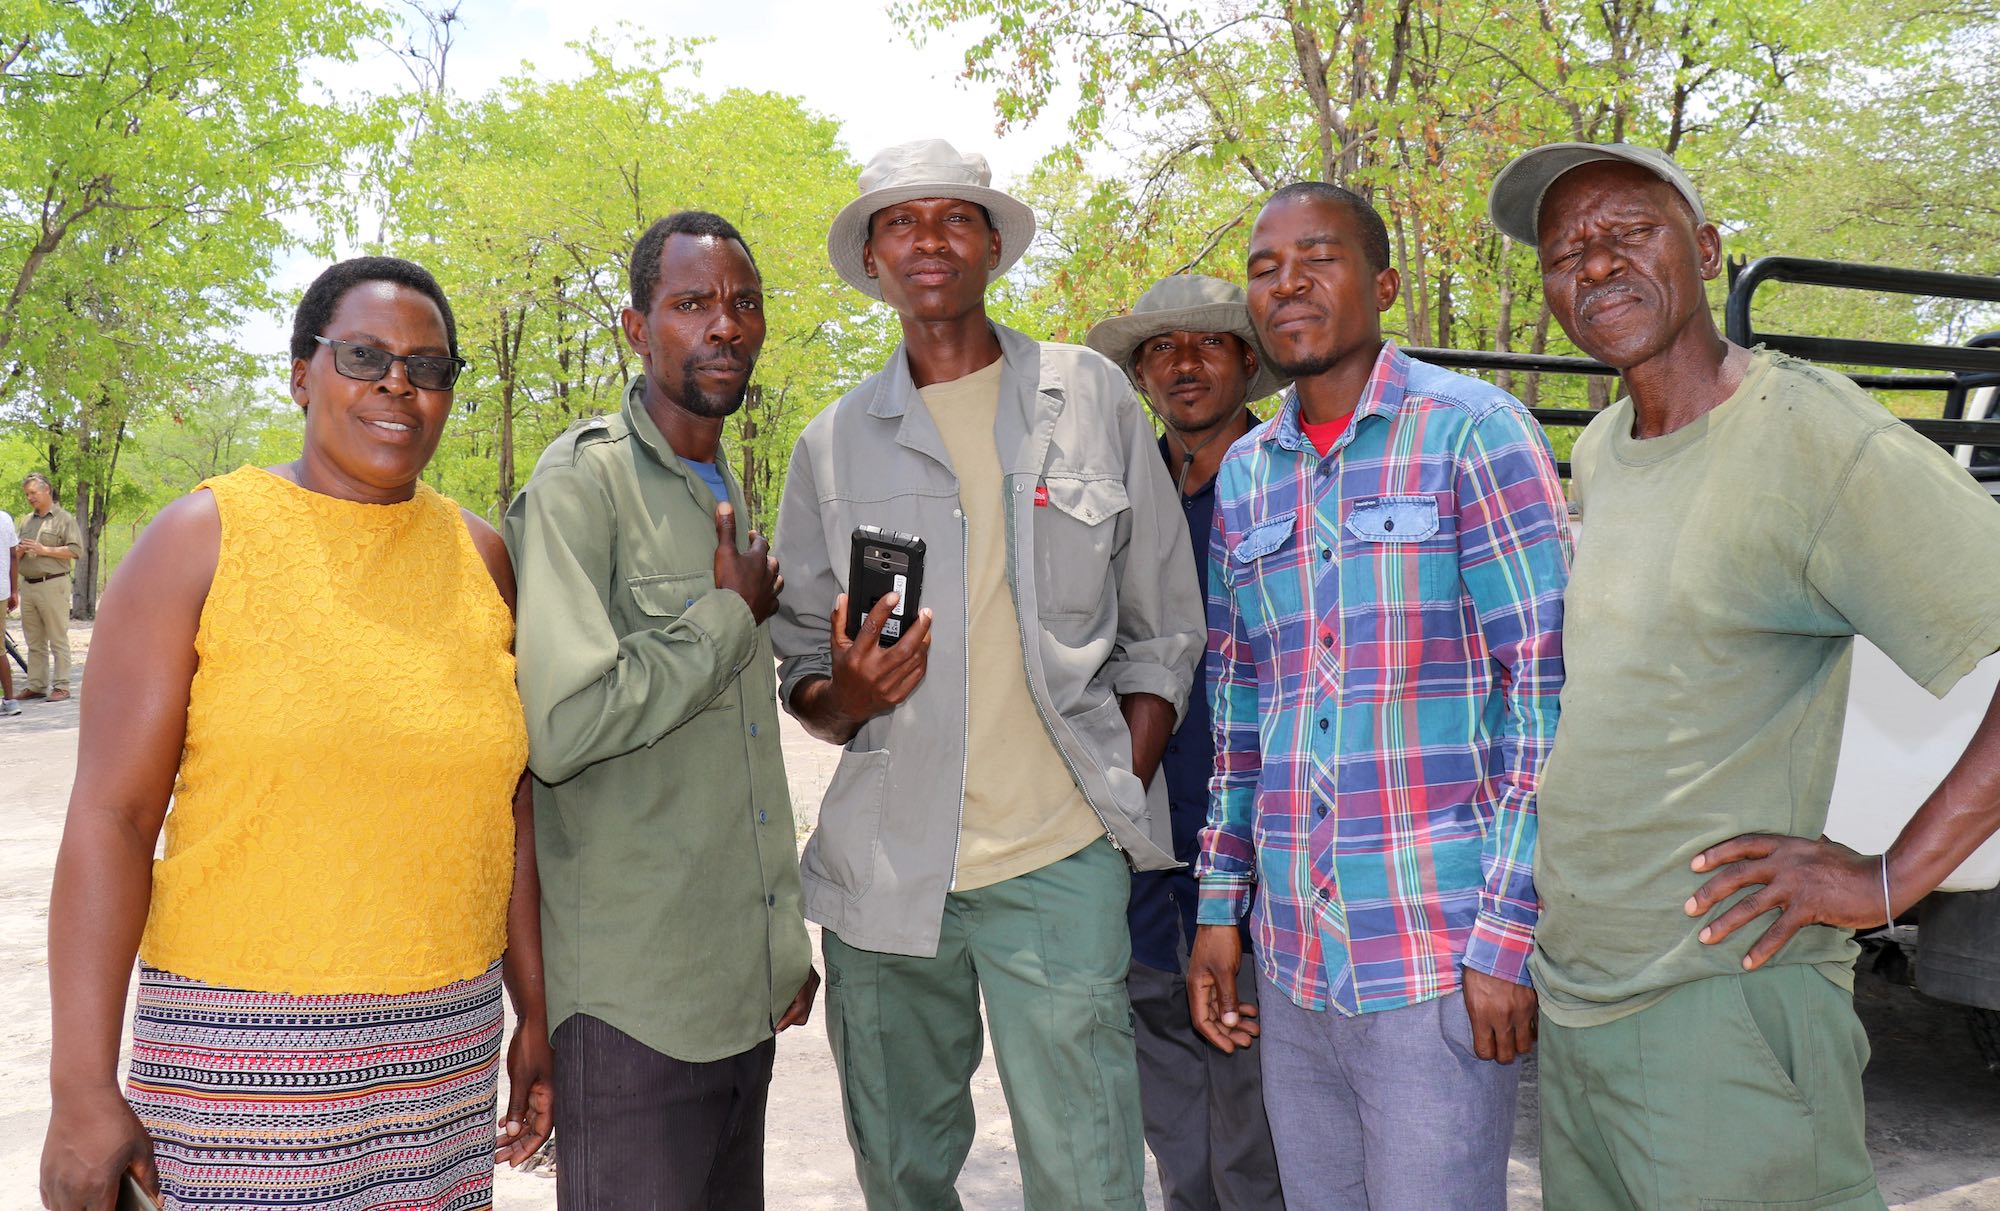 A group of community members pose with a smartphone.